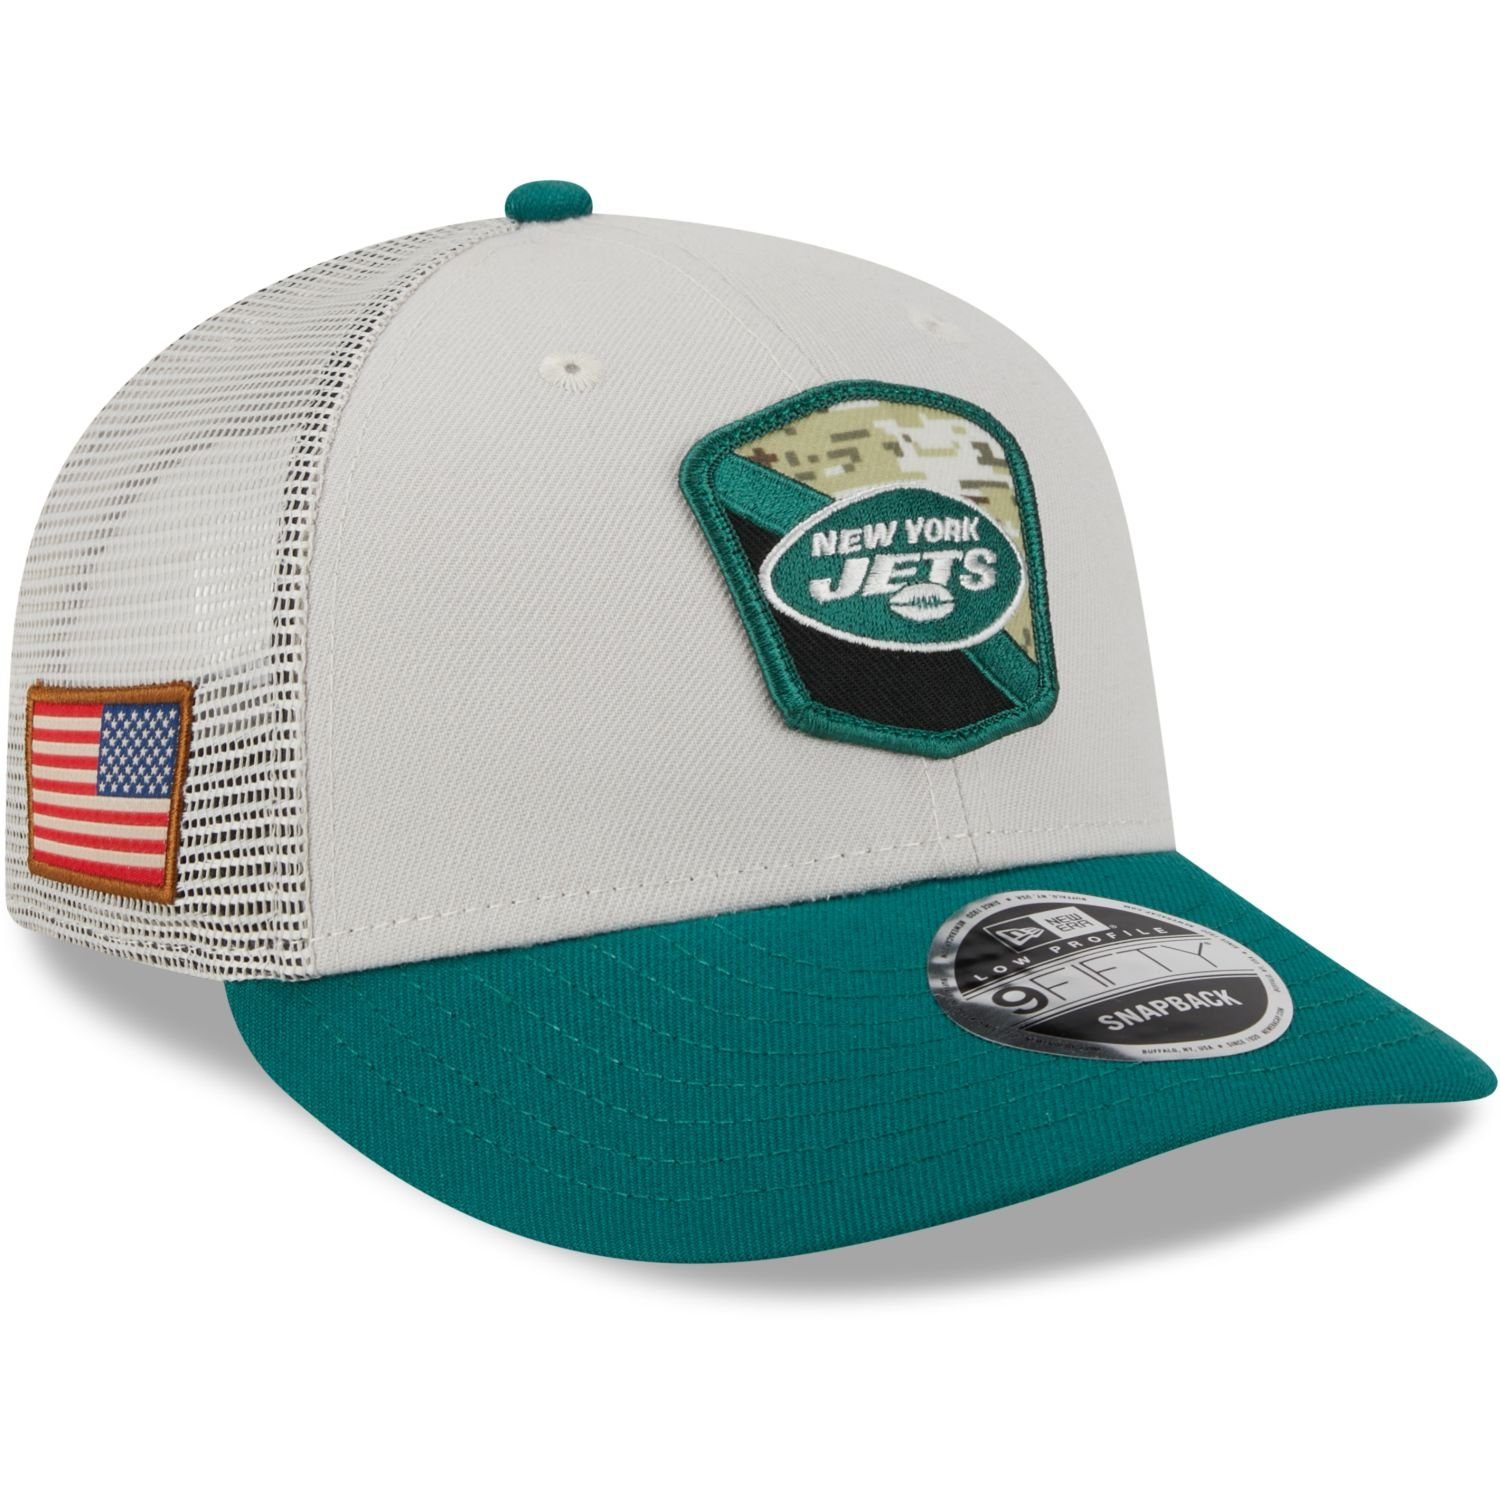 Profile Service Salute Era York NFL New Snap Low Cap Snapback New Jets to 9Fifty